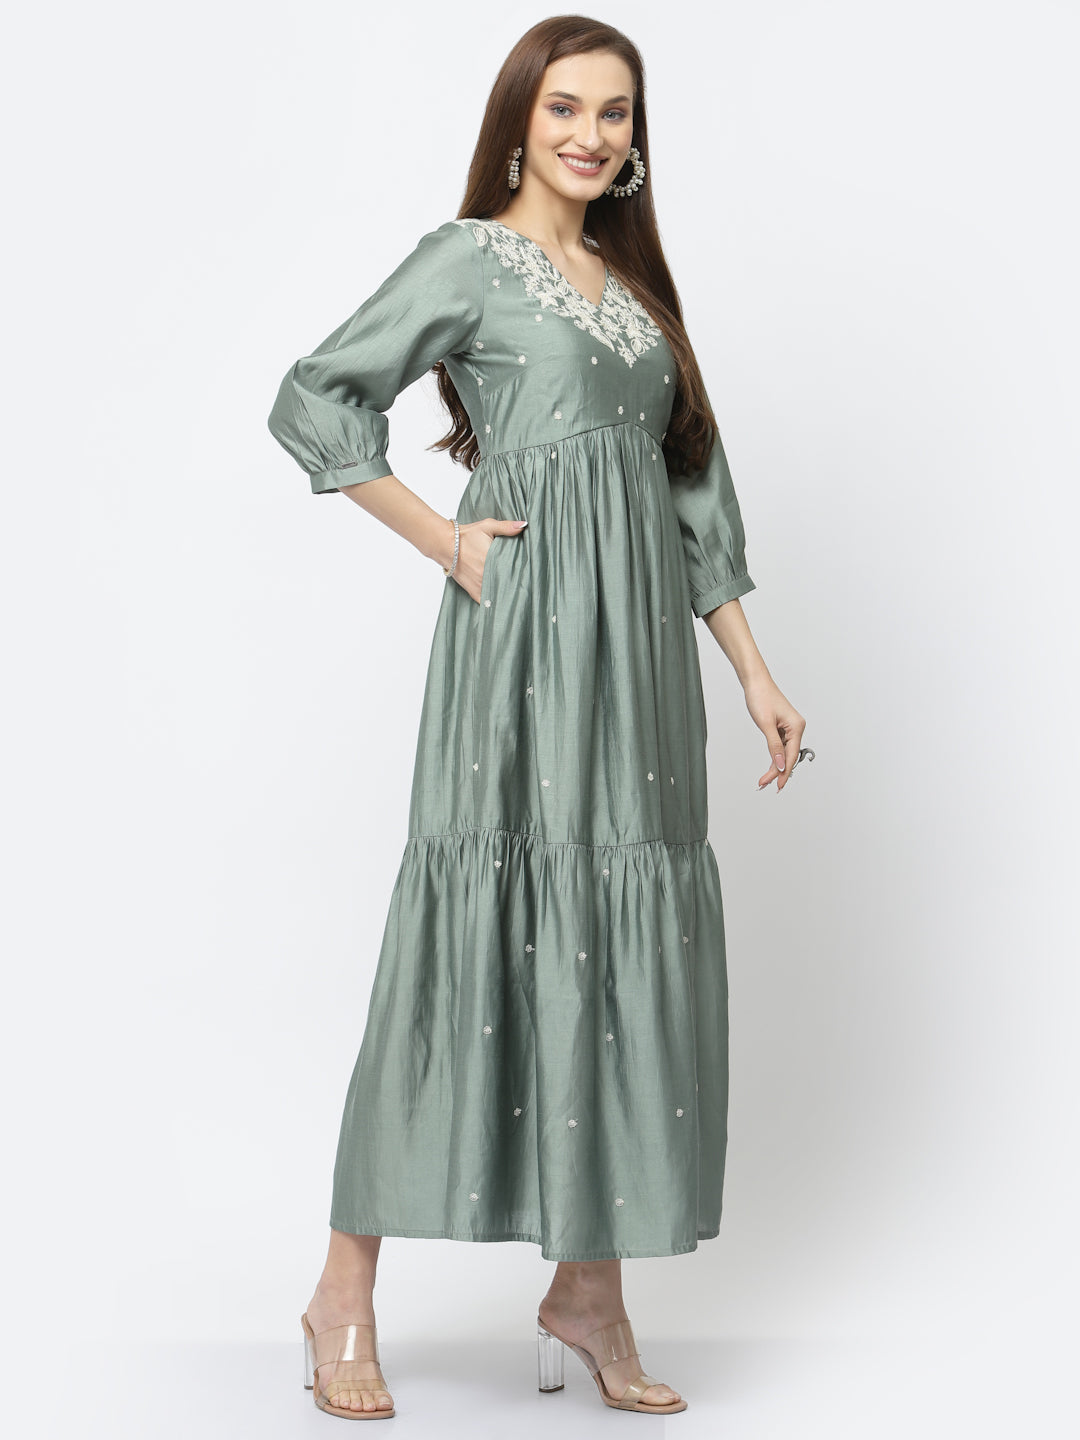 Spanish Green Maxi Flared Dress with All-Over Embroidery and Ruffled Hemline - ARH1477